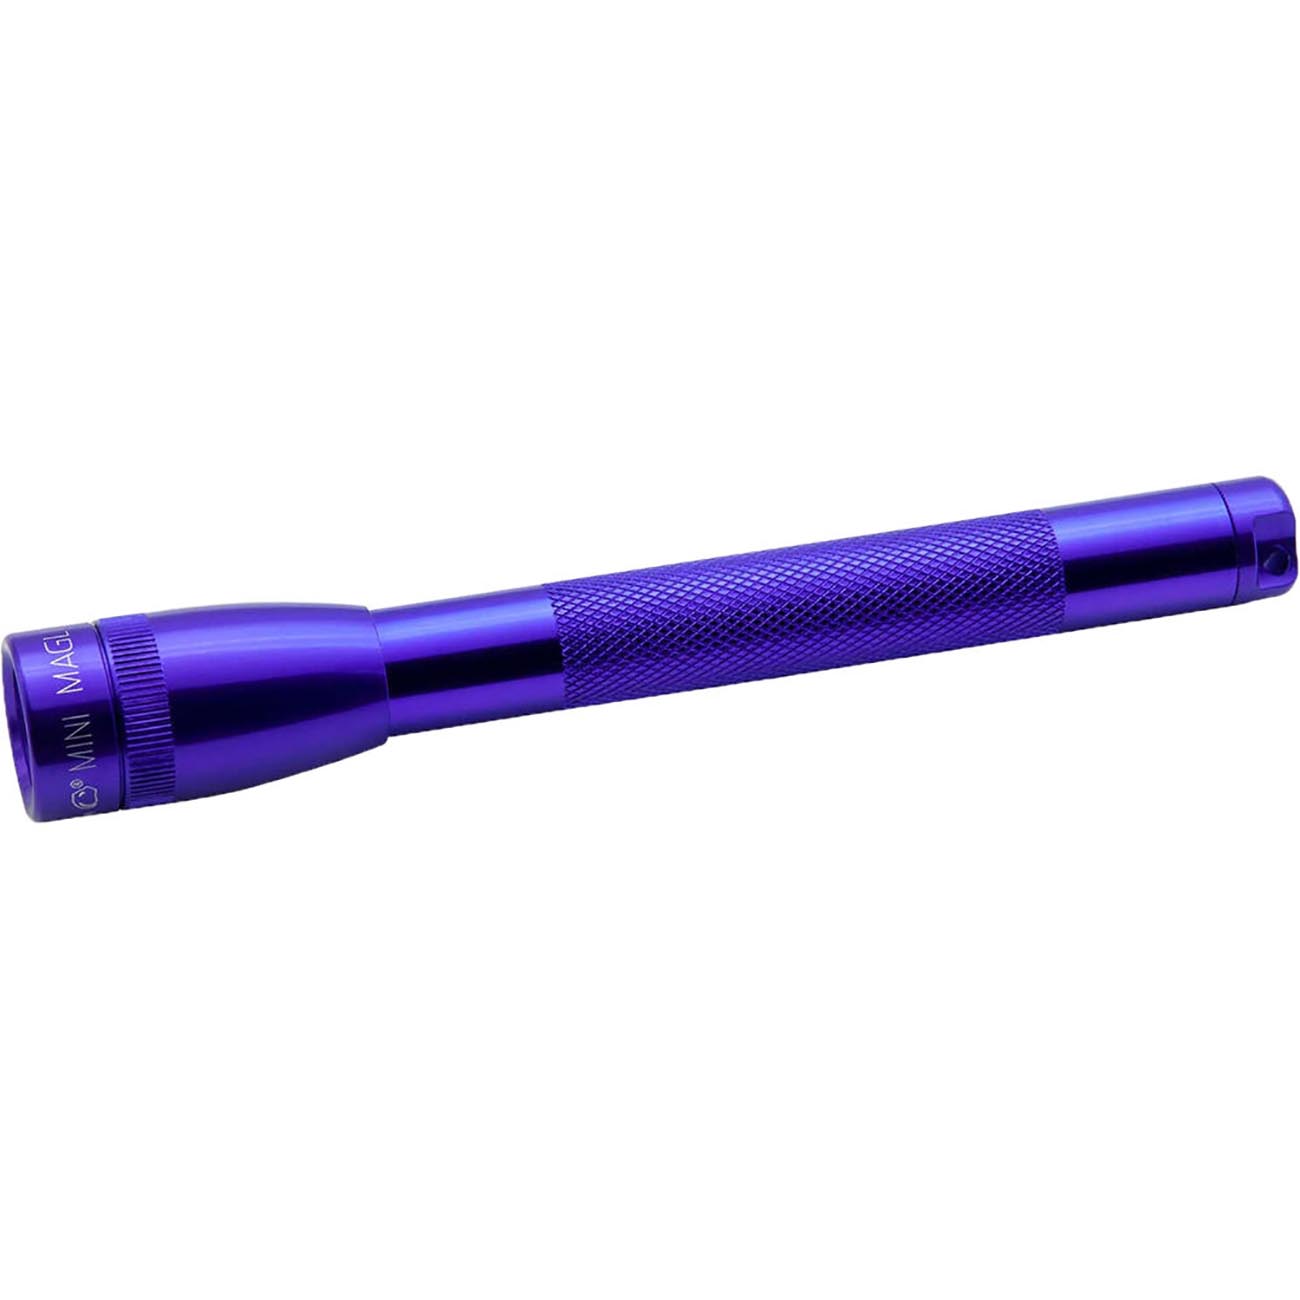 Maglite Mini Maglite 2-Cell AAA Incandescent Flashlight (Purple Clamshell Packaging)